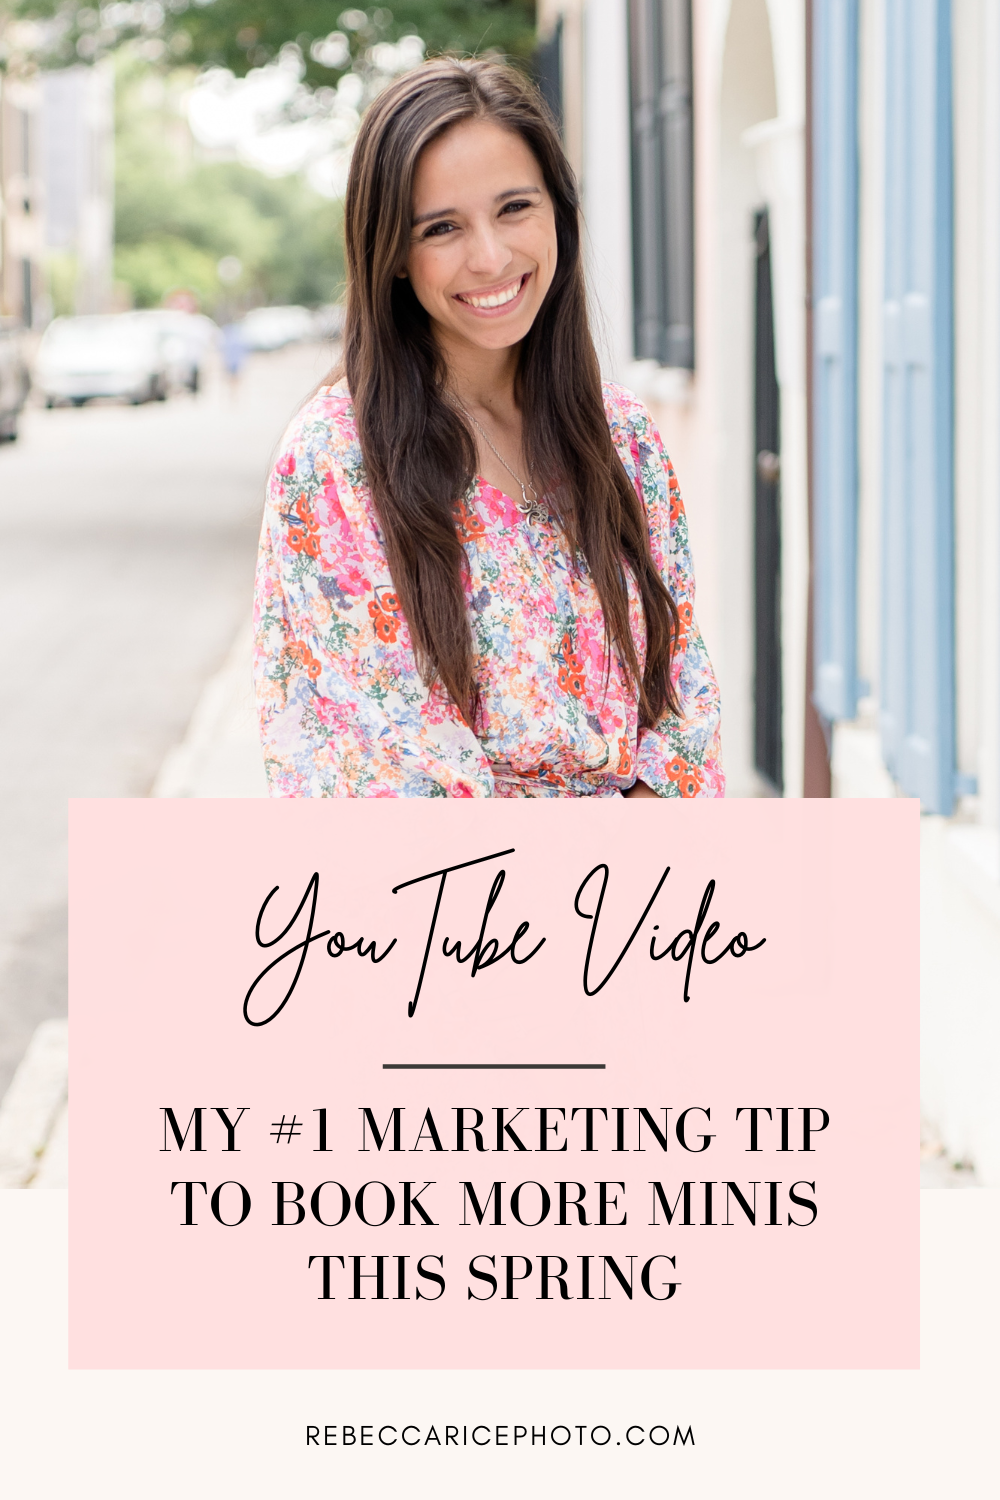 My #1 Marketing Tip to Book More Minis This Spring